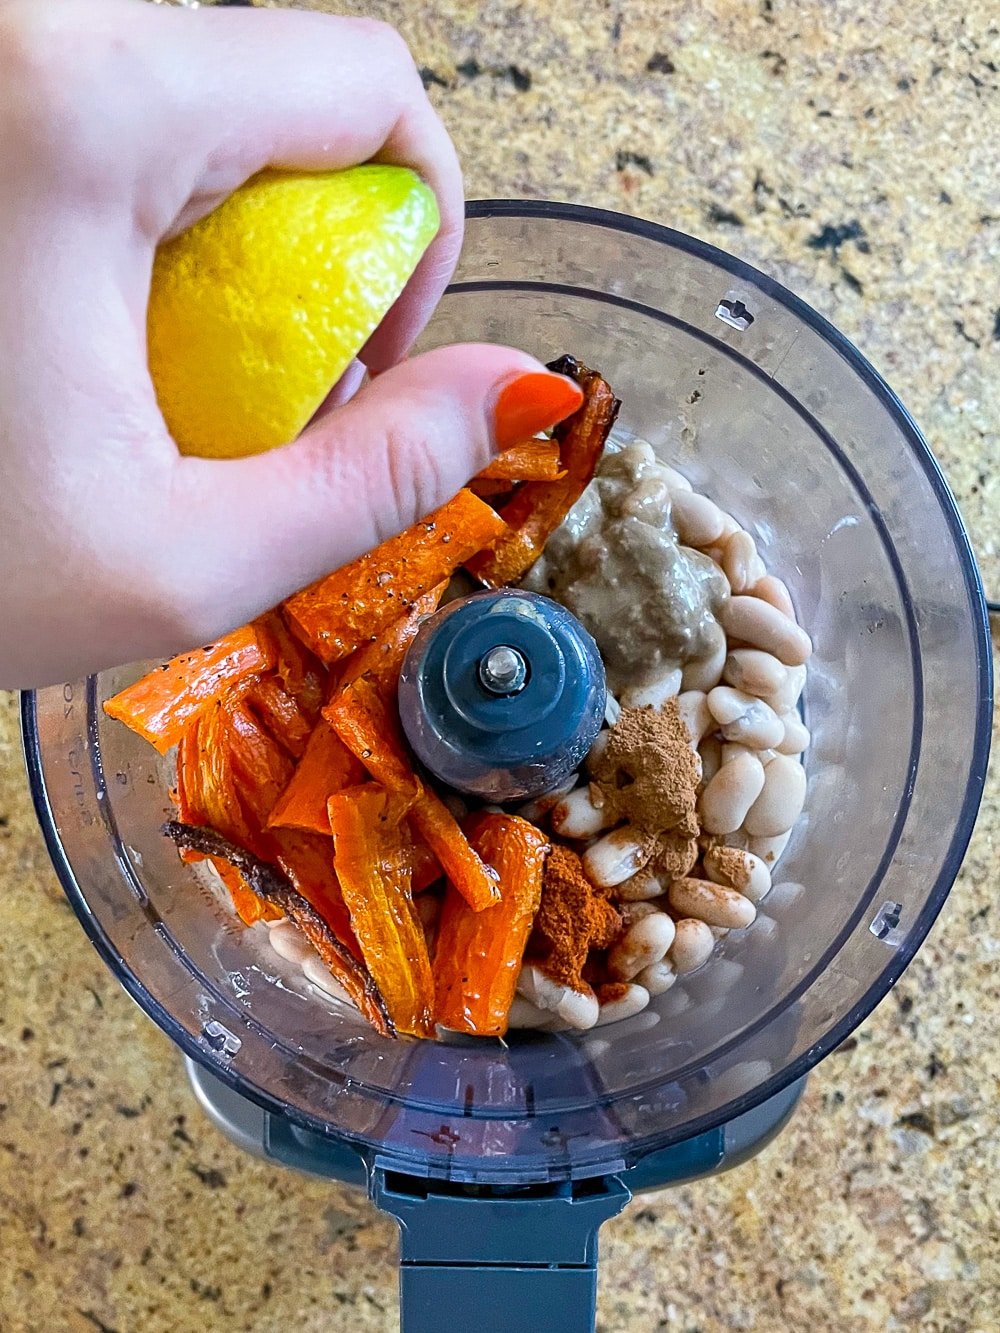 Squeezing lemon into roasted carrot hummus.